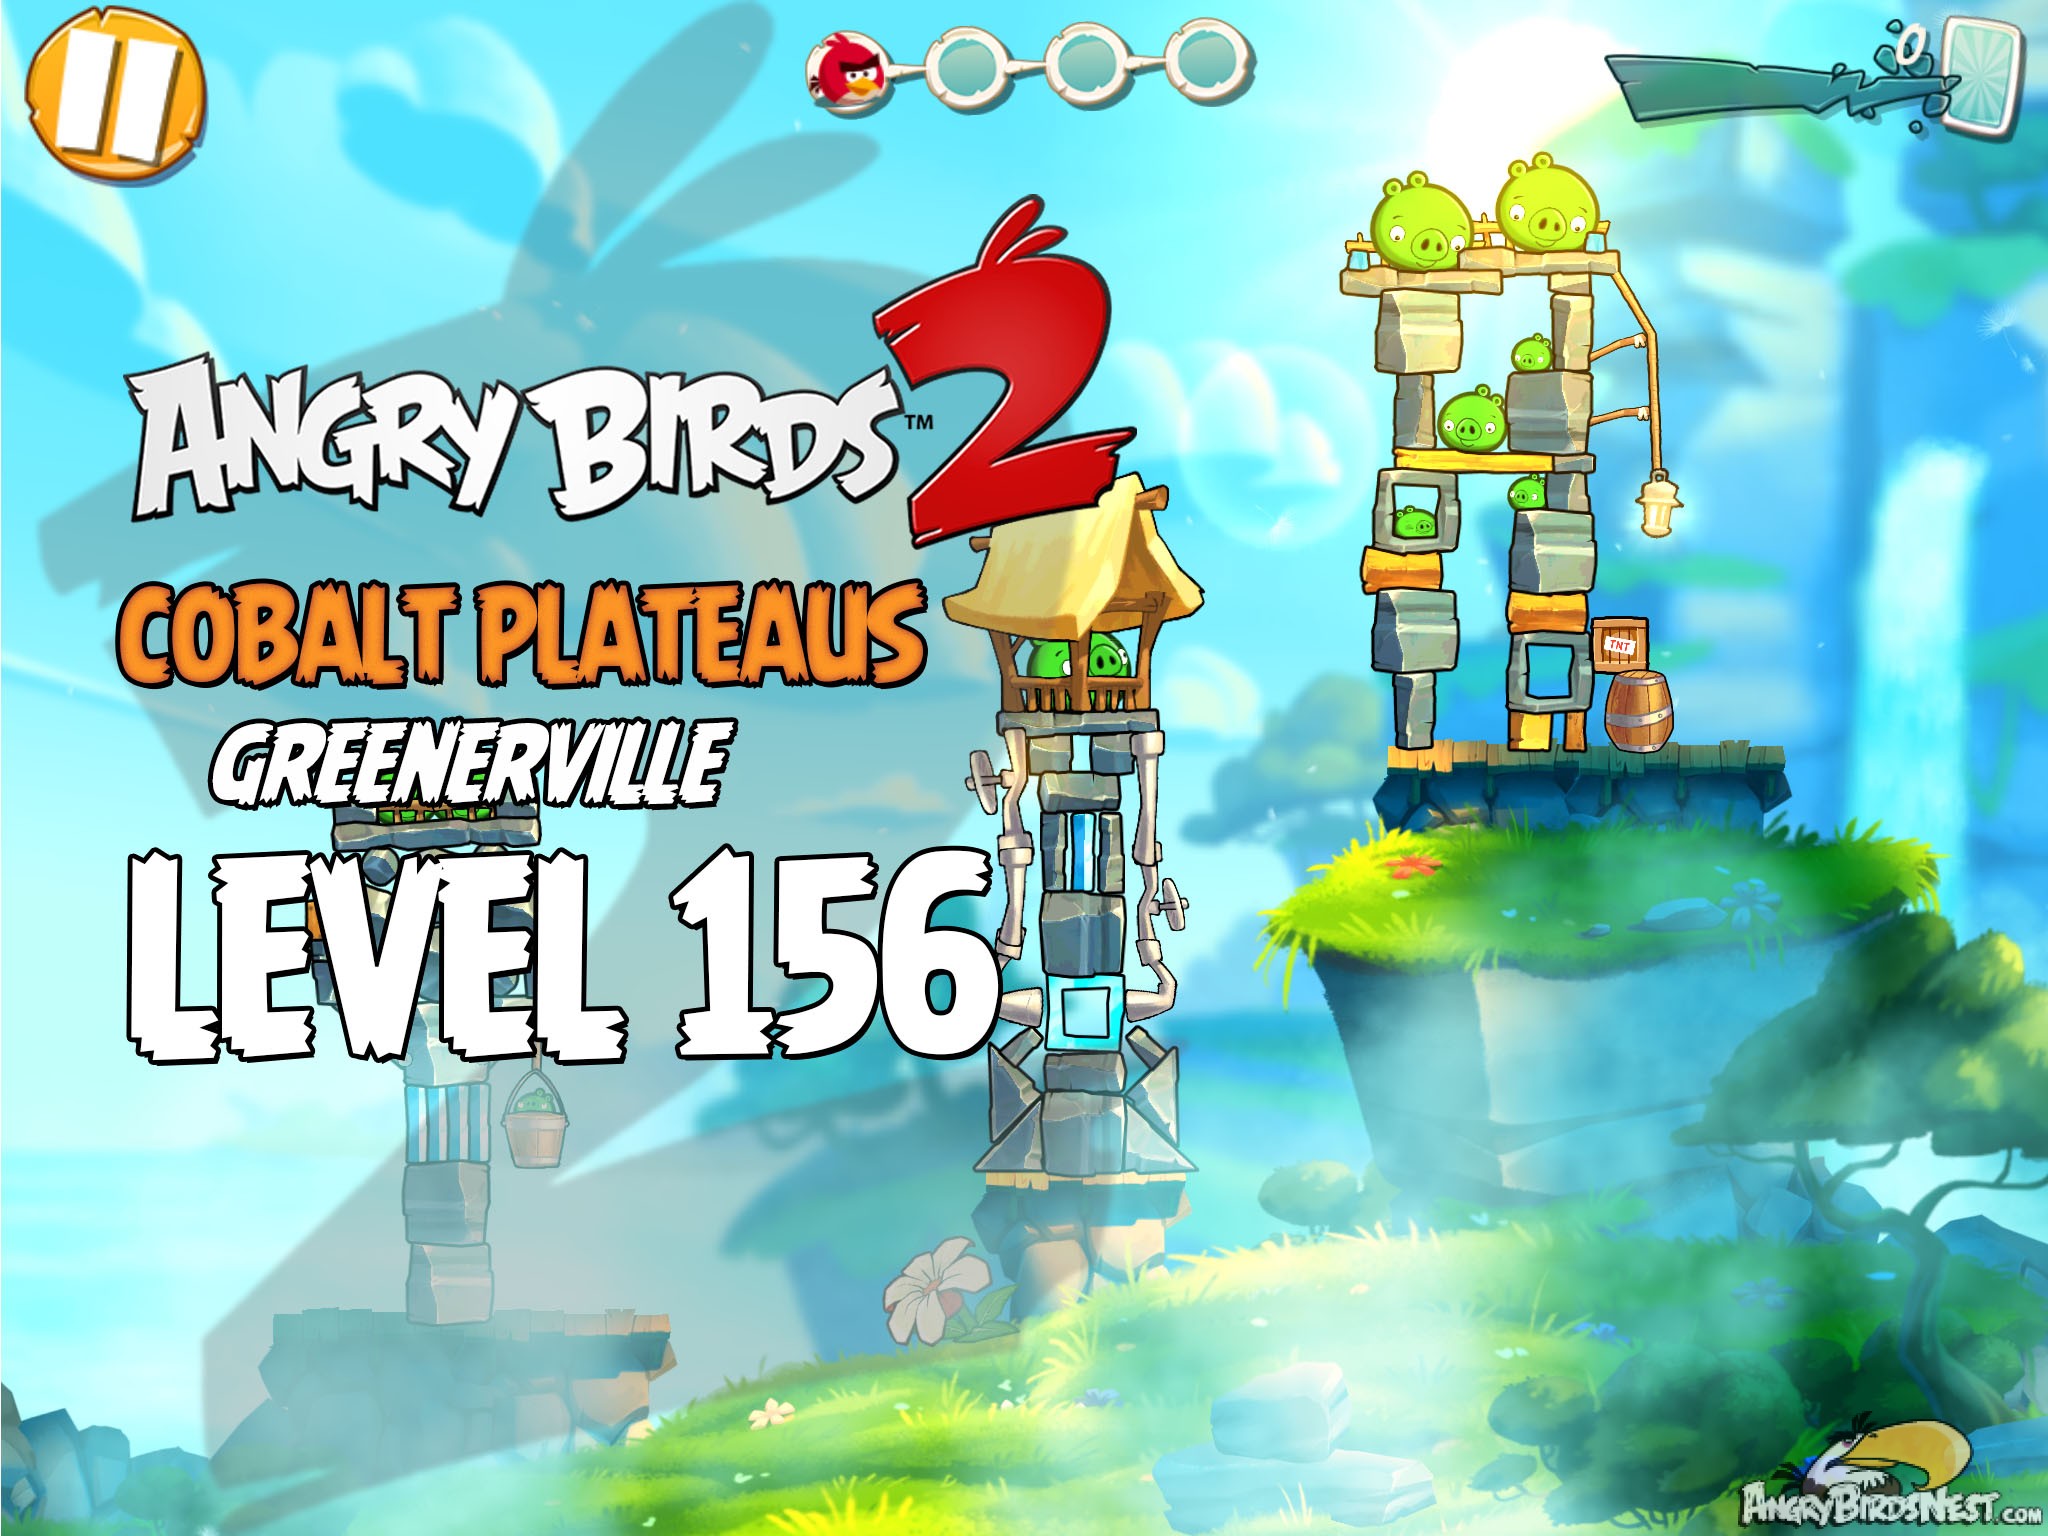 Angry Birds 2 Cobalt Plateaus Greenerville Level 156